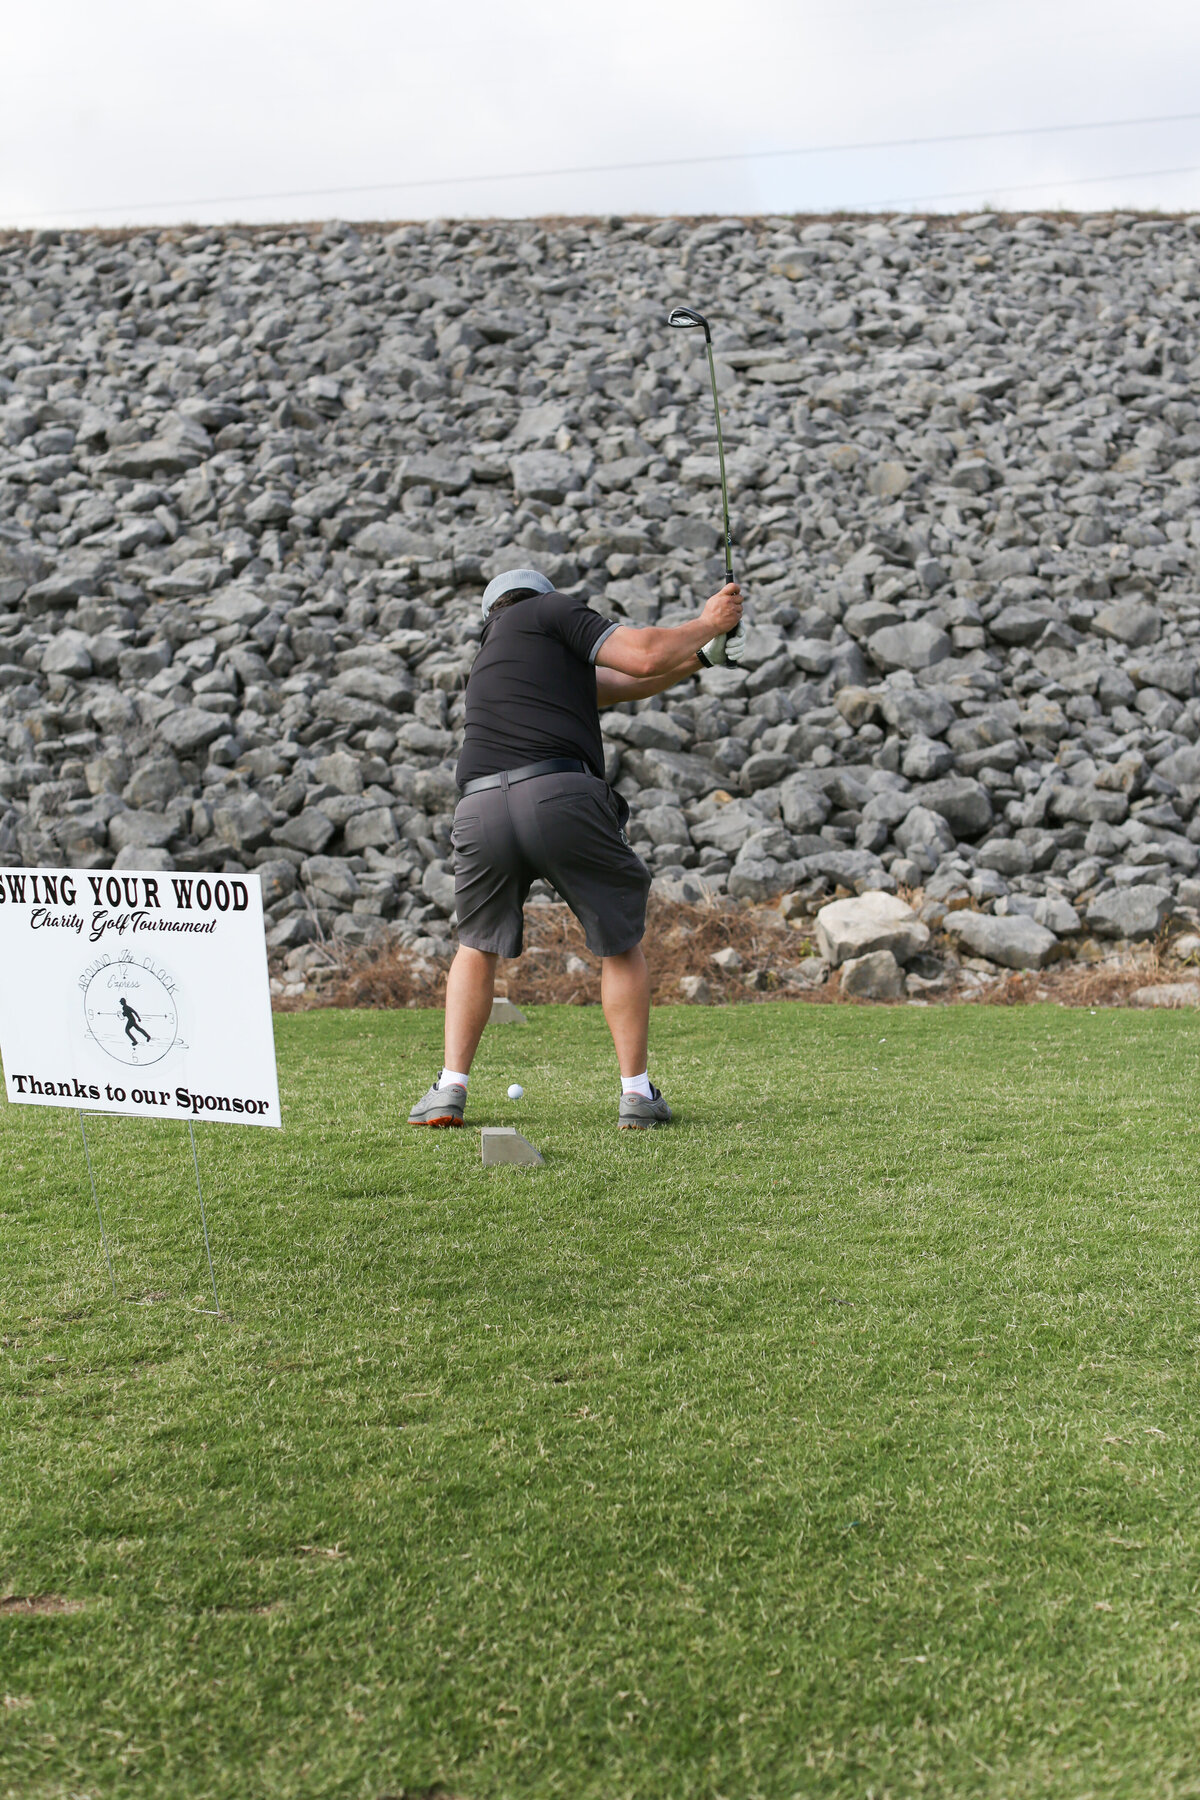 golf-tournament-charity-mental-health-swing-your-wood-fundraiser (68)